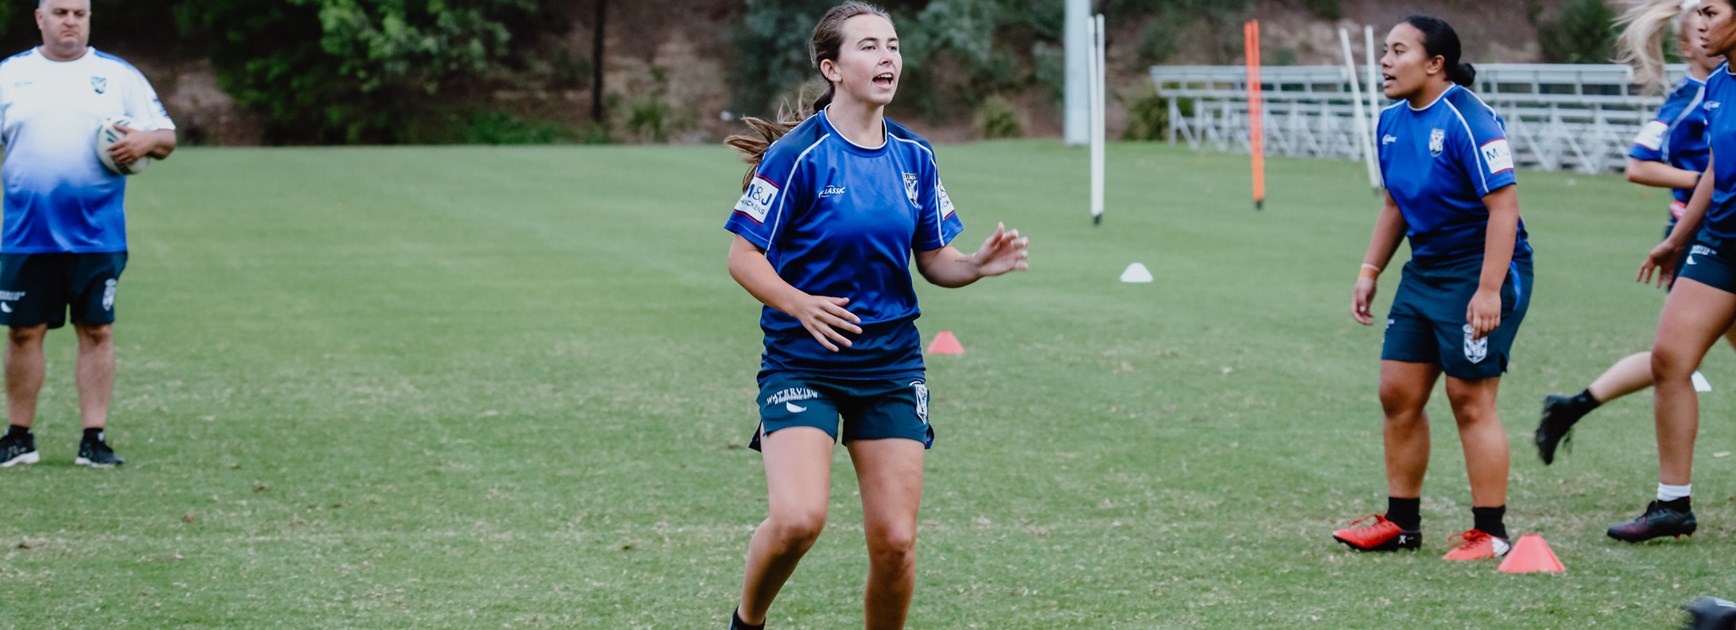 Bulldogs Harvey Norman Women's squad confirmed for 2020